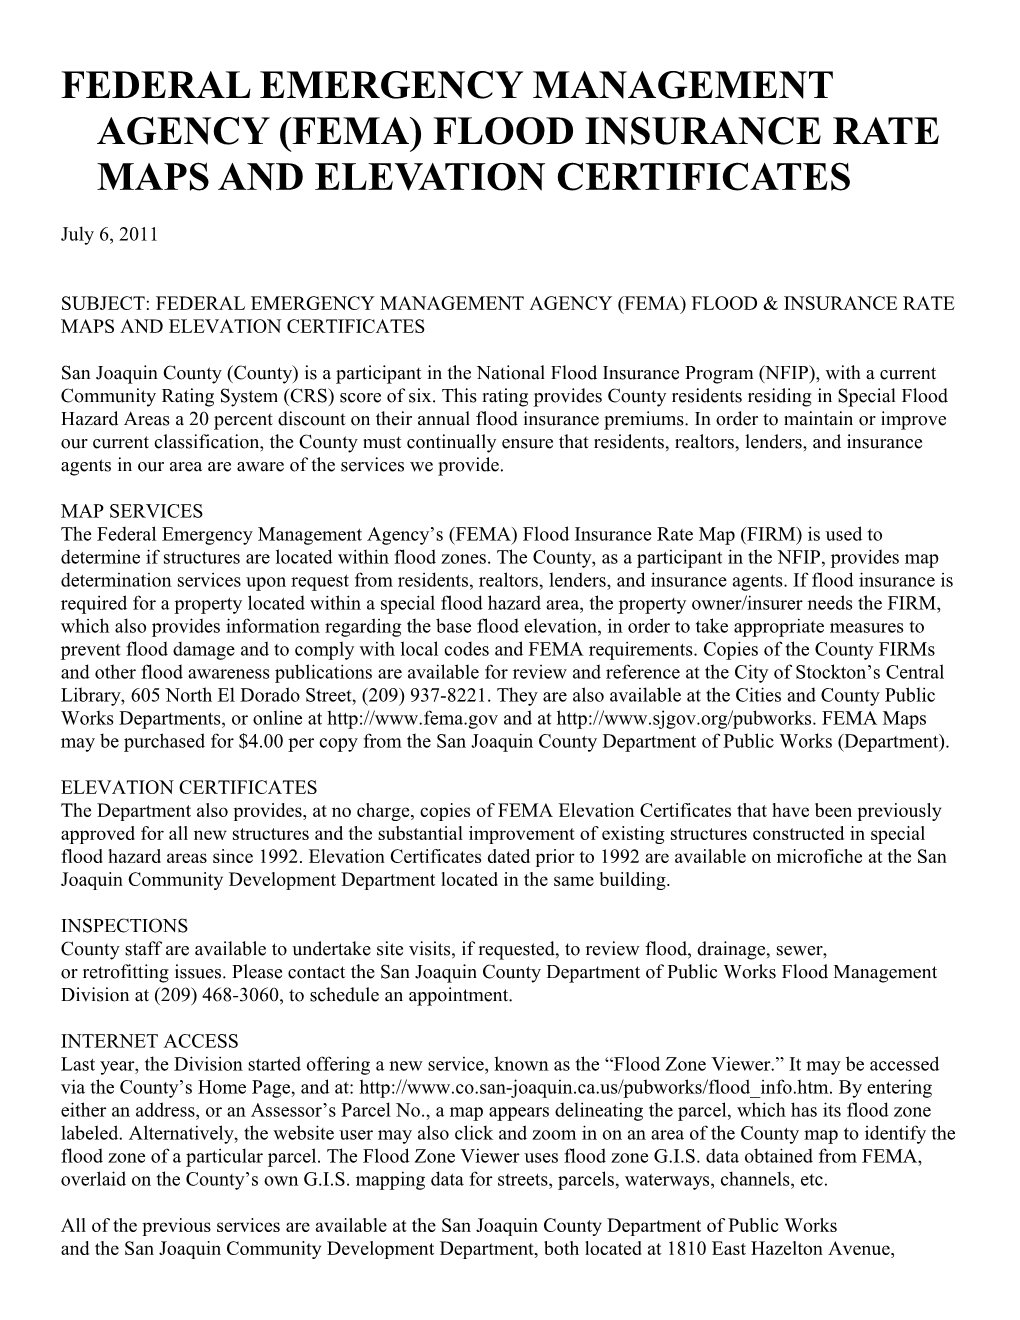 Federal Emergency Management Agency (Fema) Flood Insurance Rate Maps and Elevation Certificates